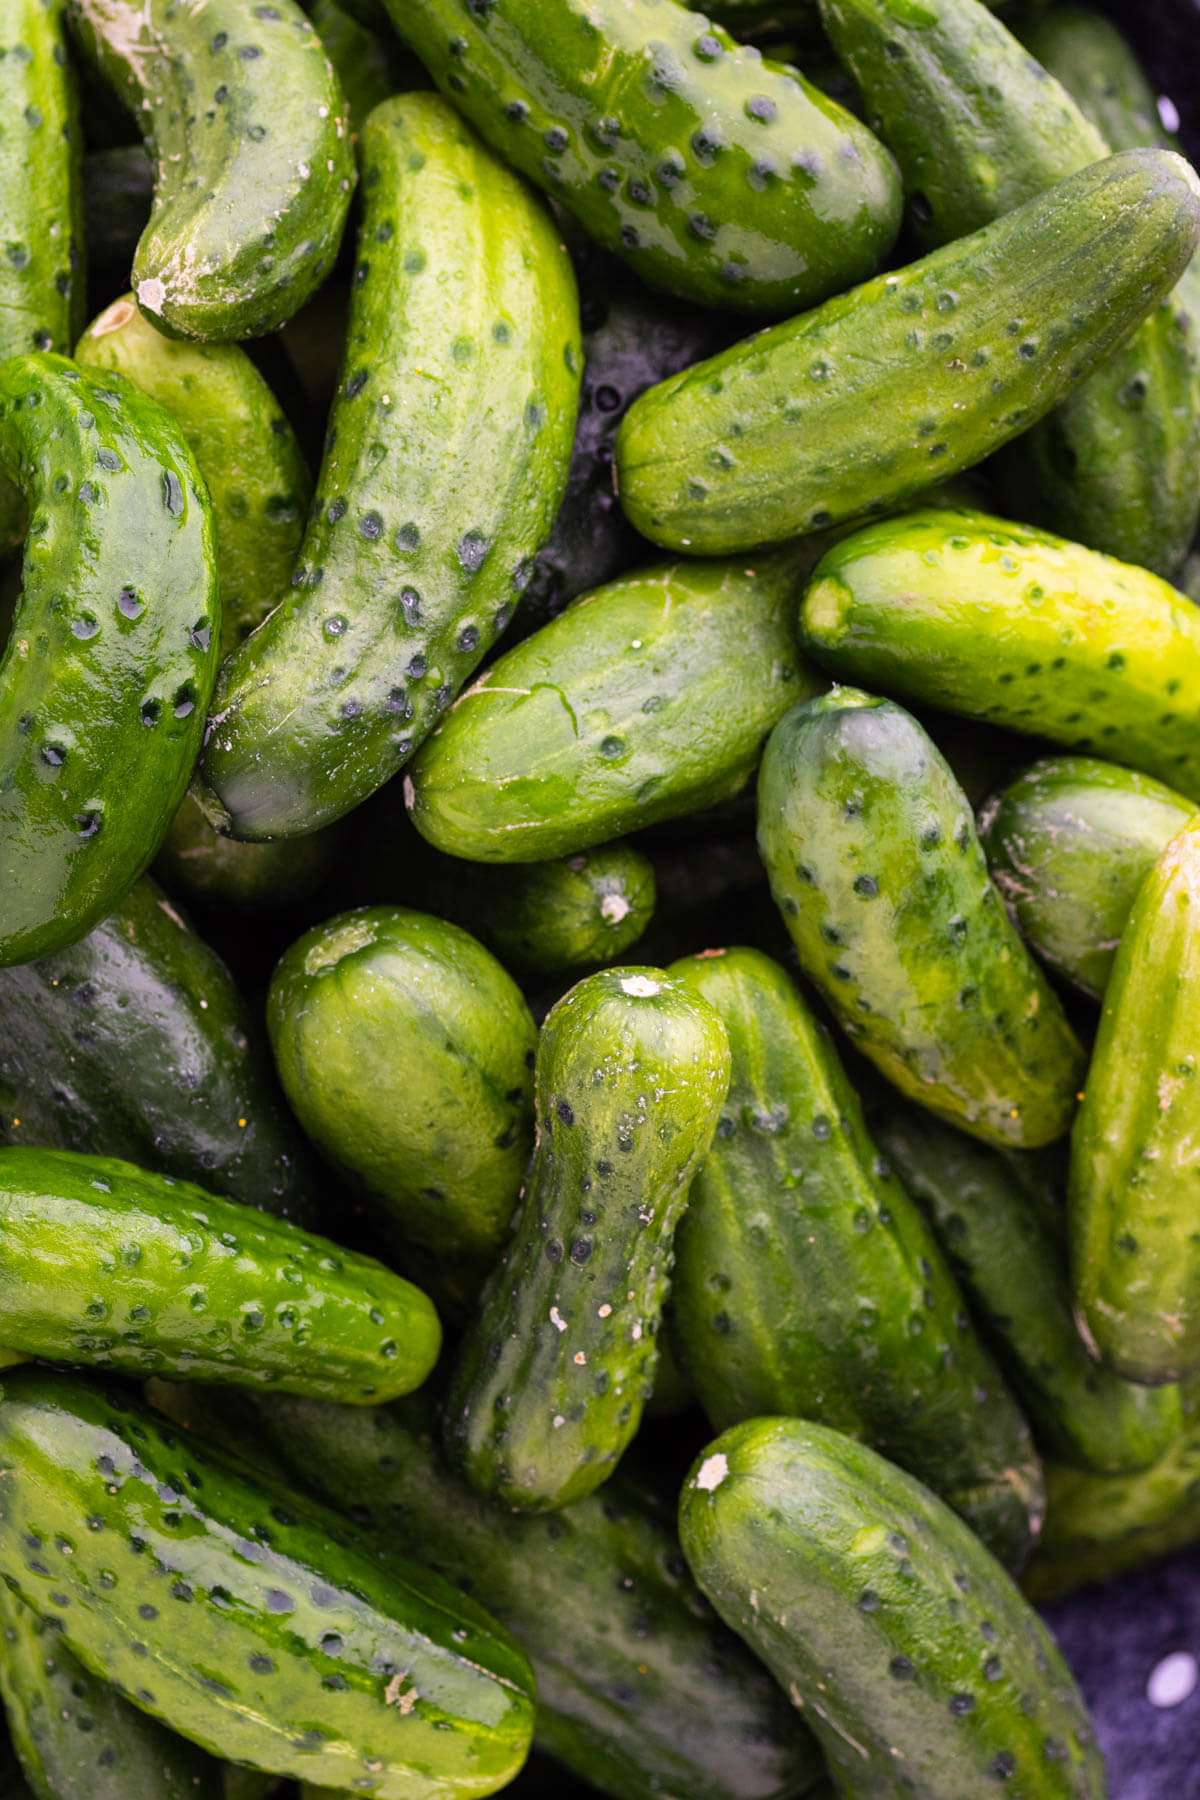 Vibrant green pickling cucumbers ready to be pickled.